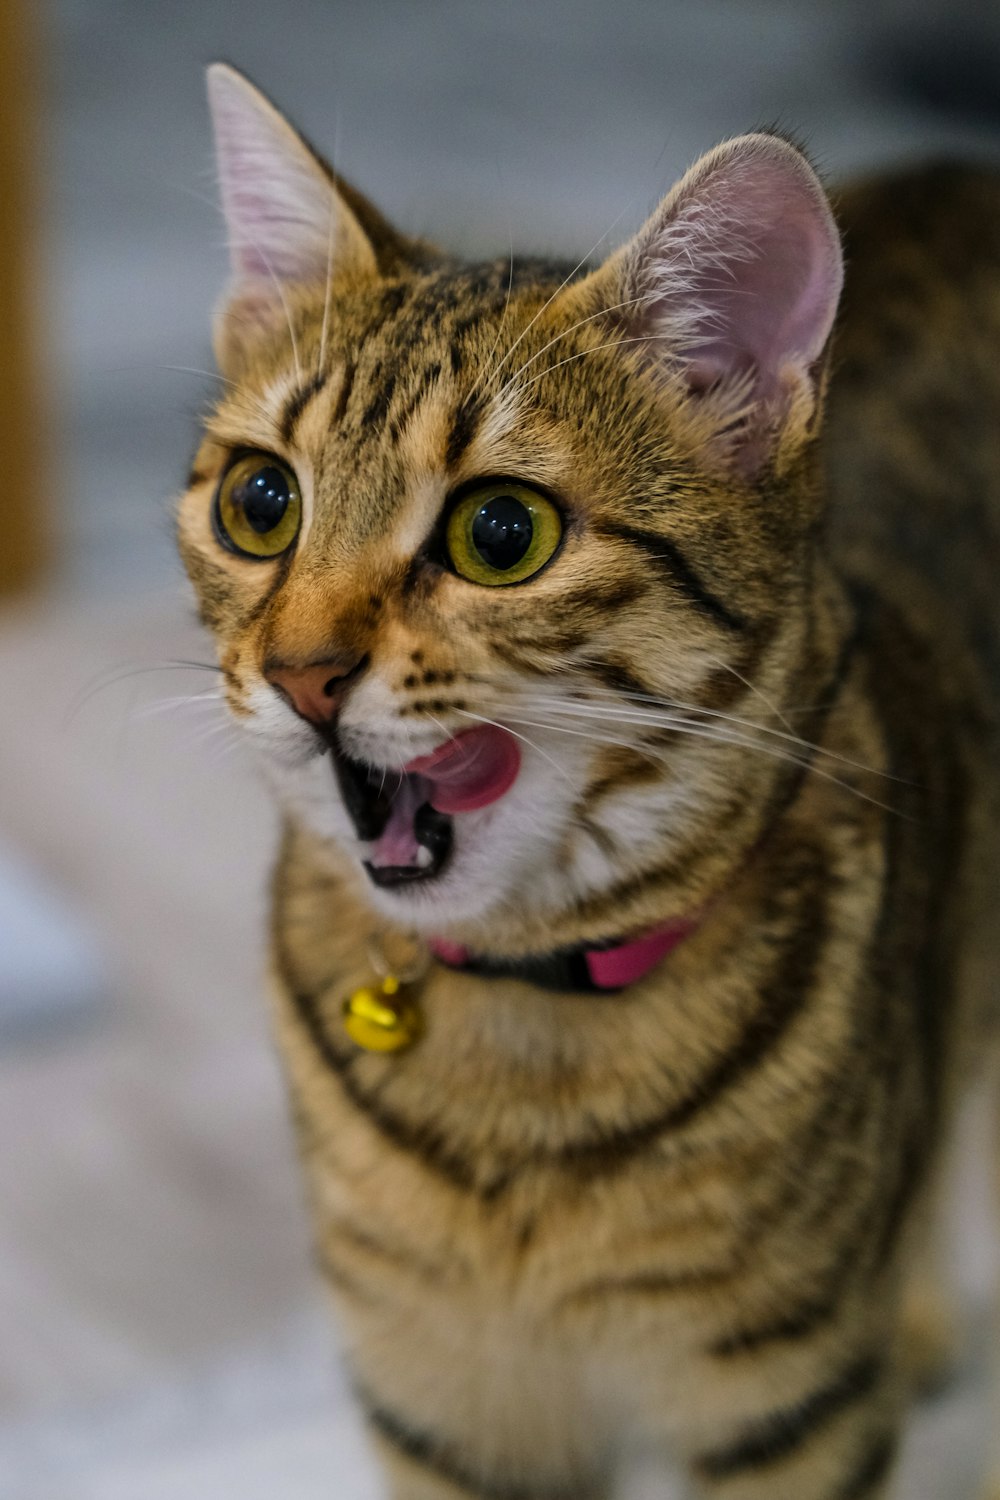 a cat with its mouth open standing on a tile floor